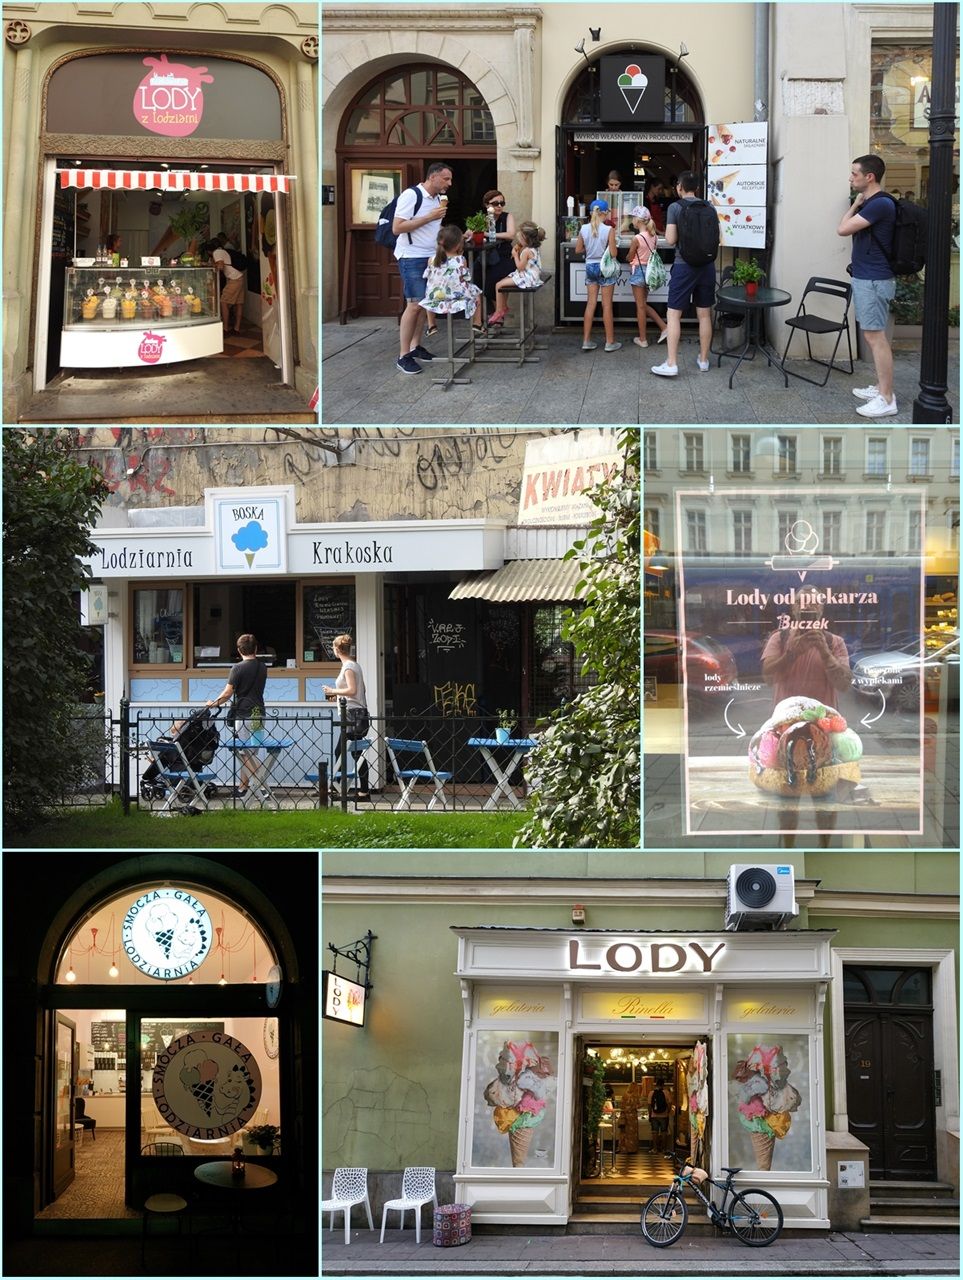 Polish people love ice cream (Lody). There are ice cream shops everywhere.